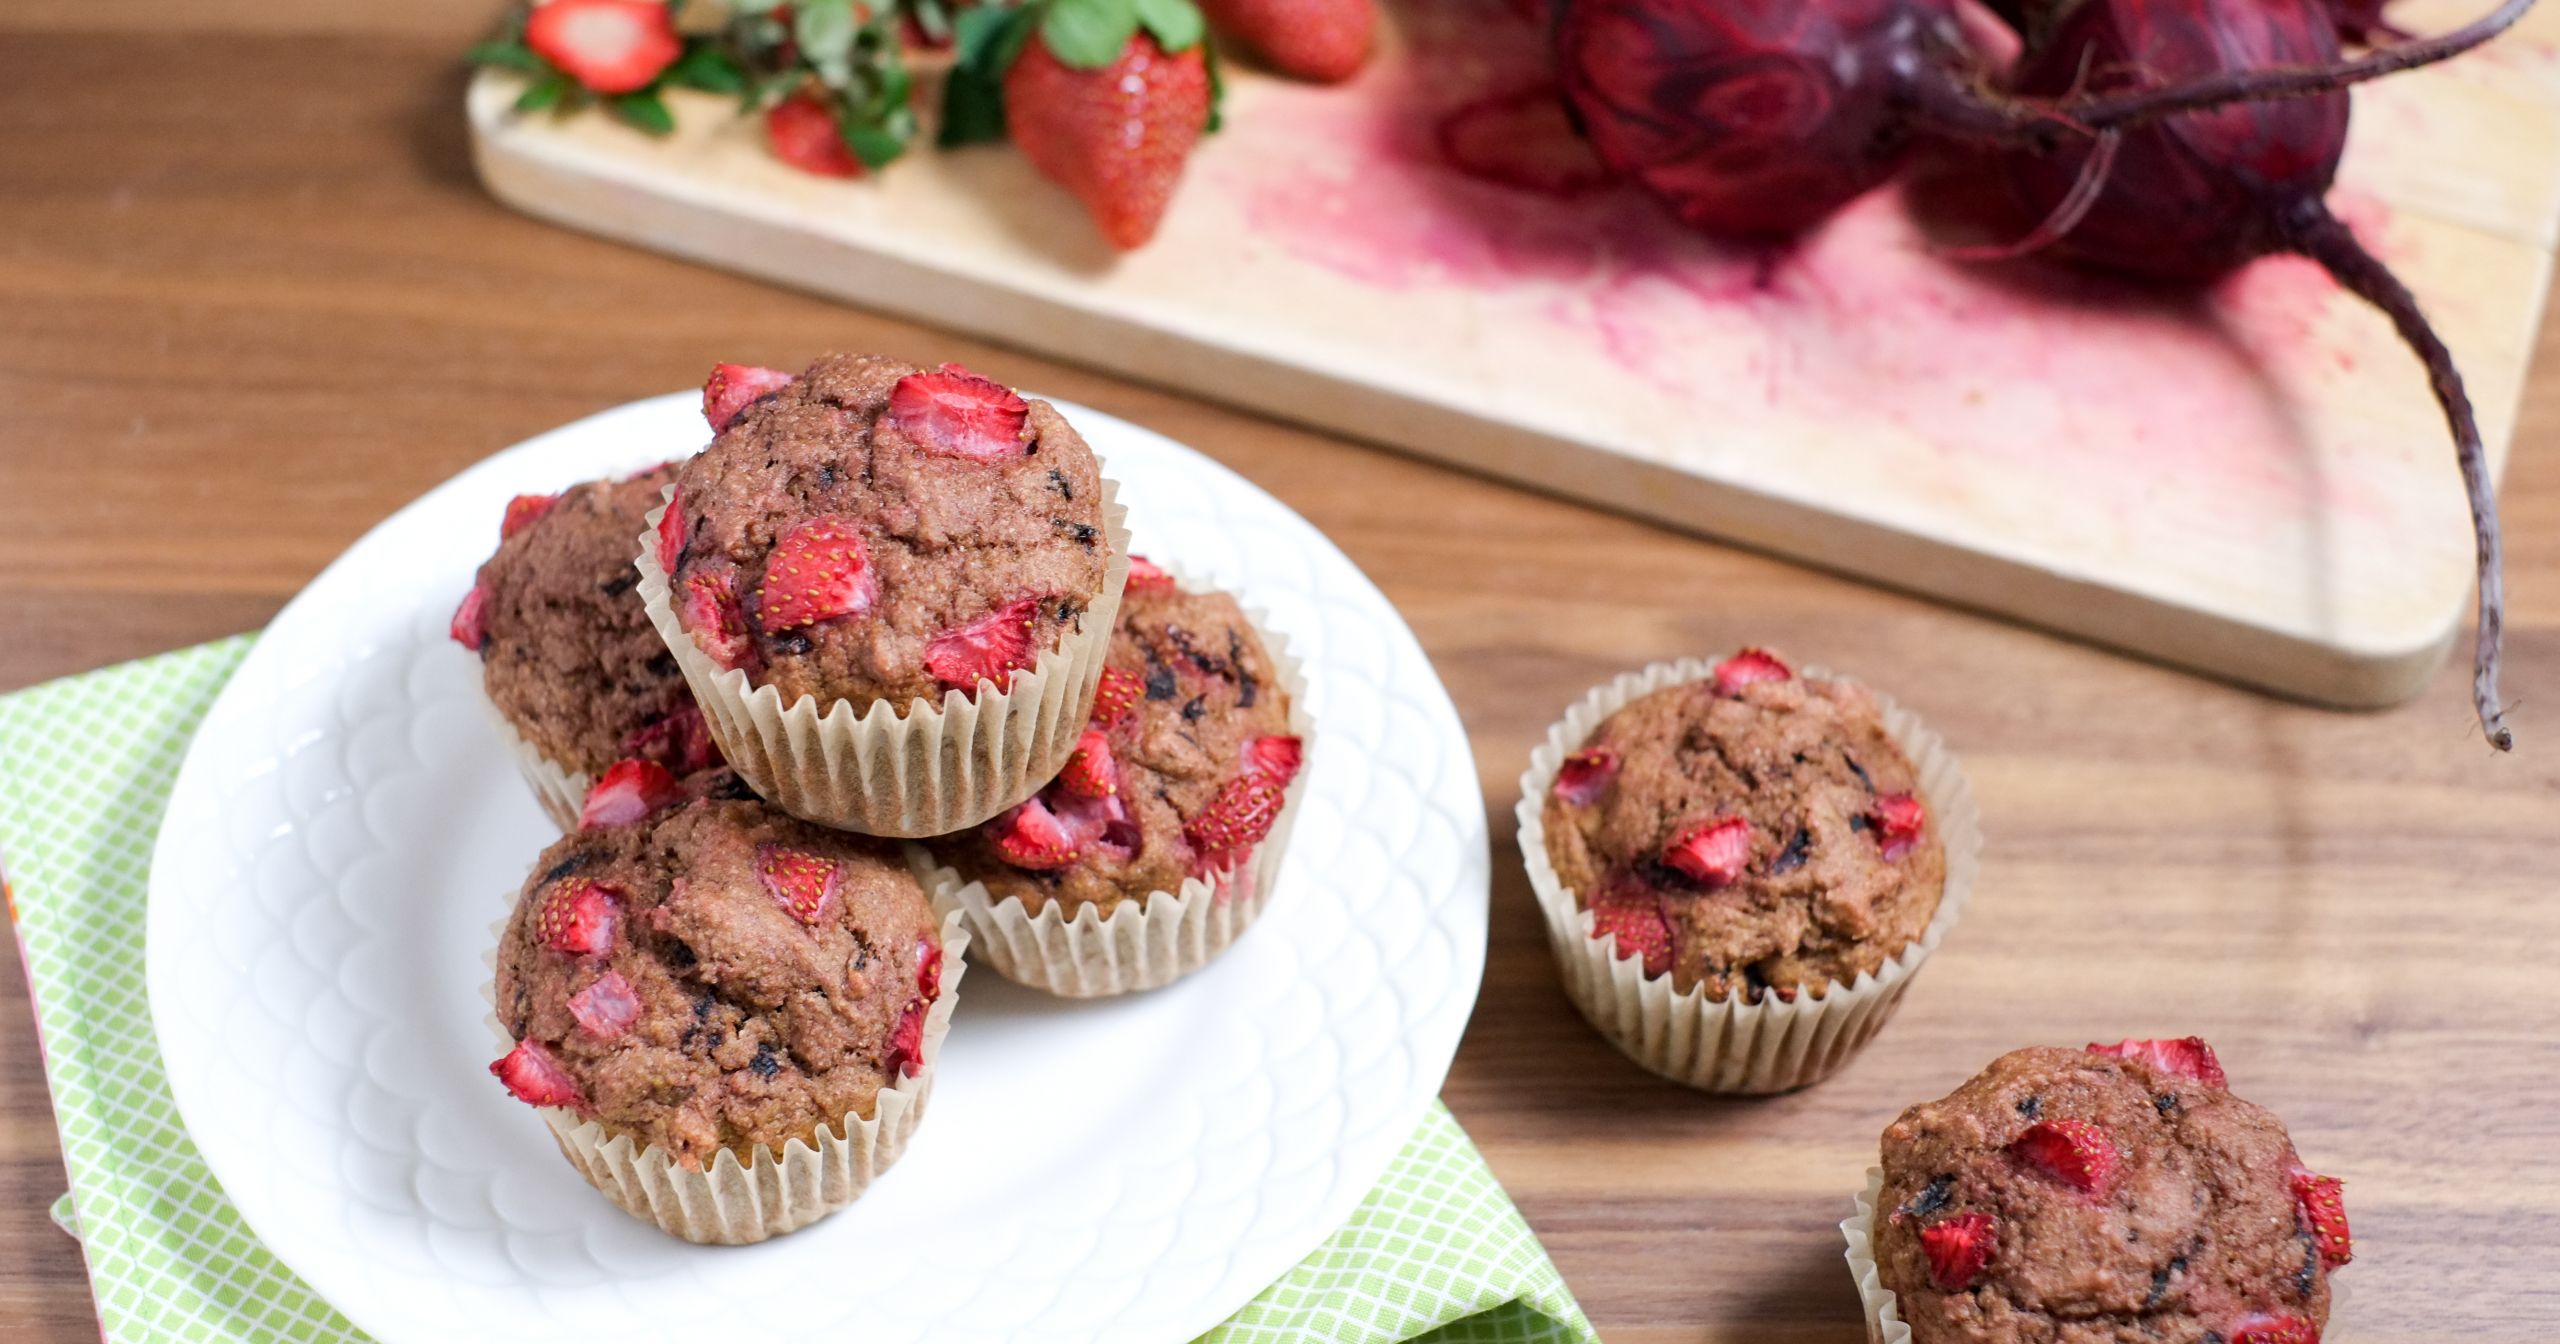 Beet Recipes For Kids
 Whole Wheat Strawberry Beet Muffins Recipe